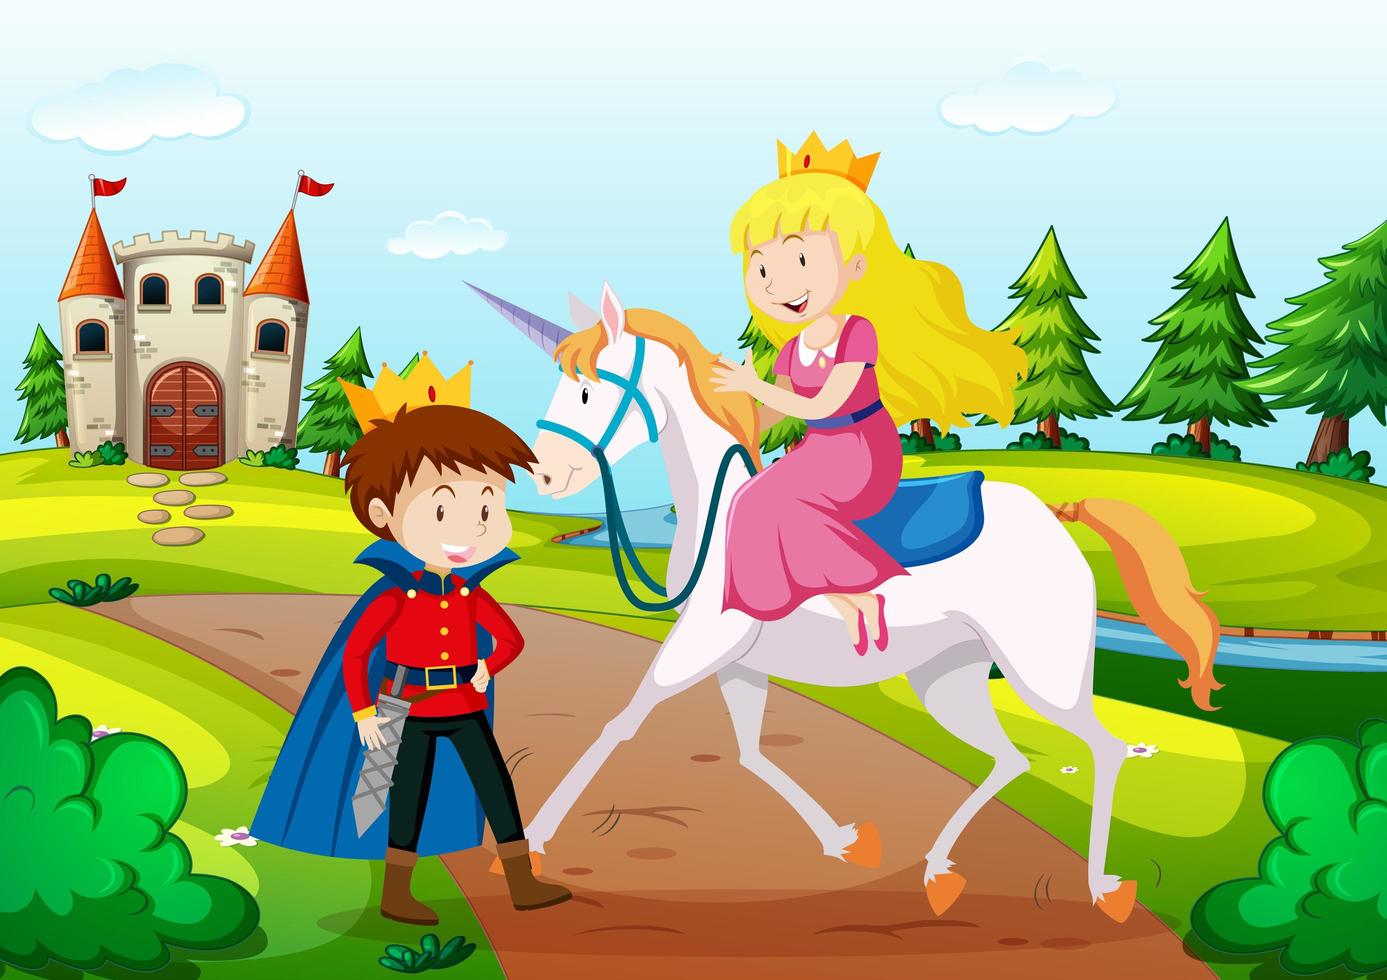 Prince and princess in fairytale land scene vector